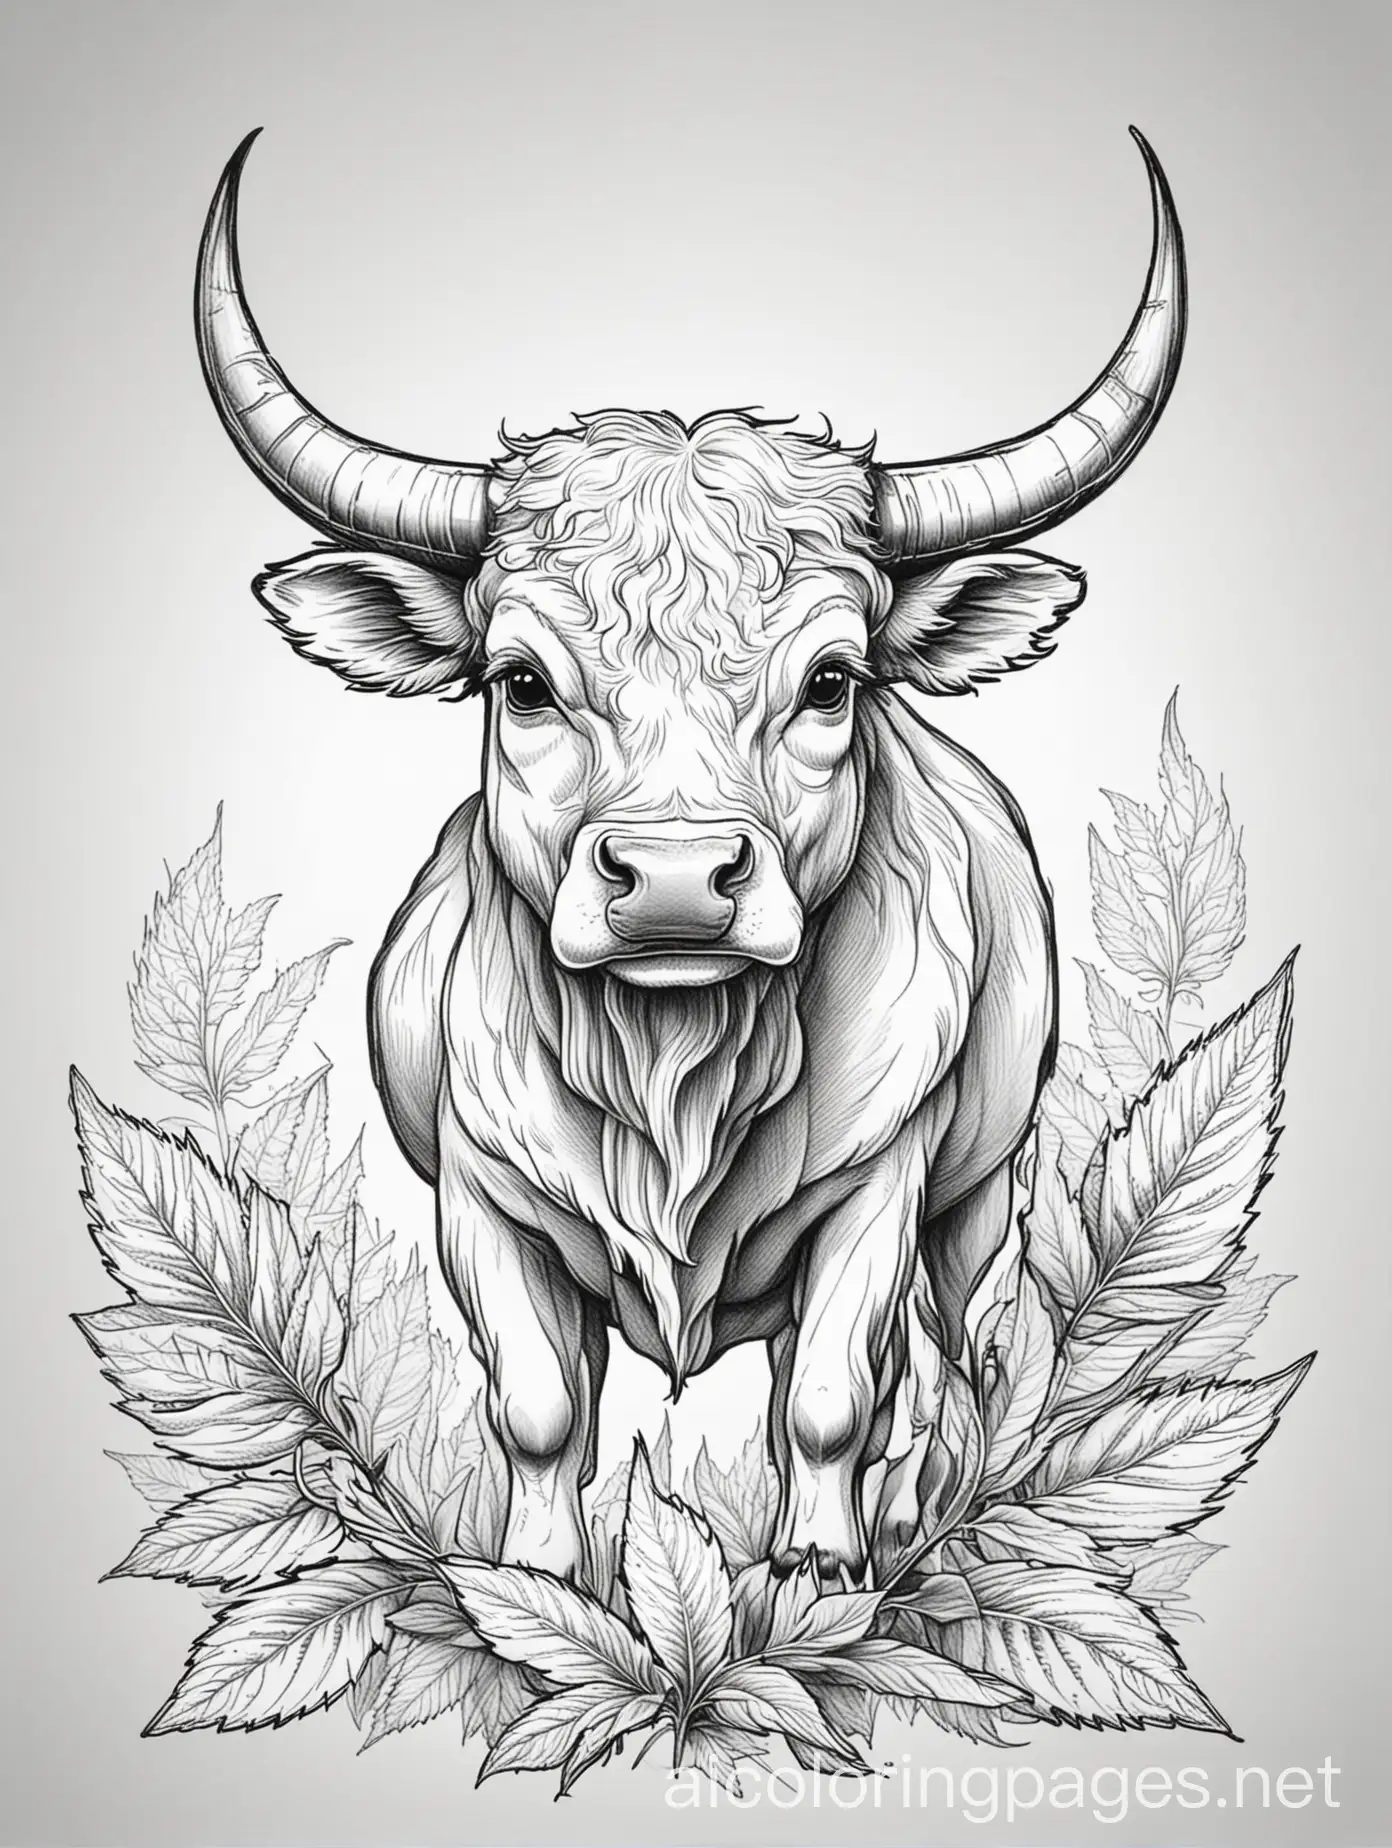 bull cannabis fantasy, Coloring Page, black and white, line art, white background, Simplicity, Ample White Space. The background of the coloring page is plain white to make it easy for young children to color within the lines. The outlines of all the subjects are easy to distinguish, making it simple for kids to color without too much difficulty